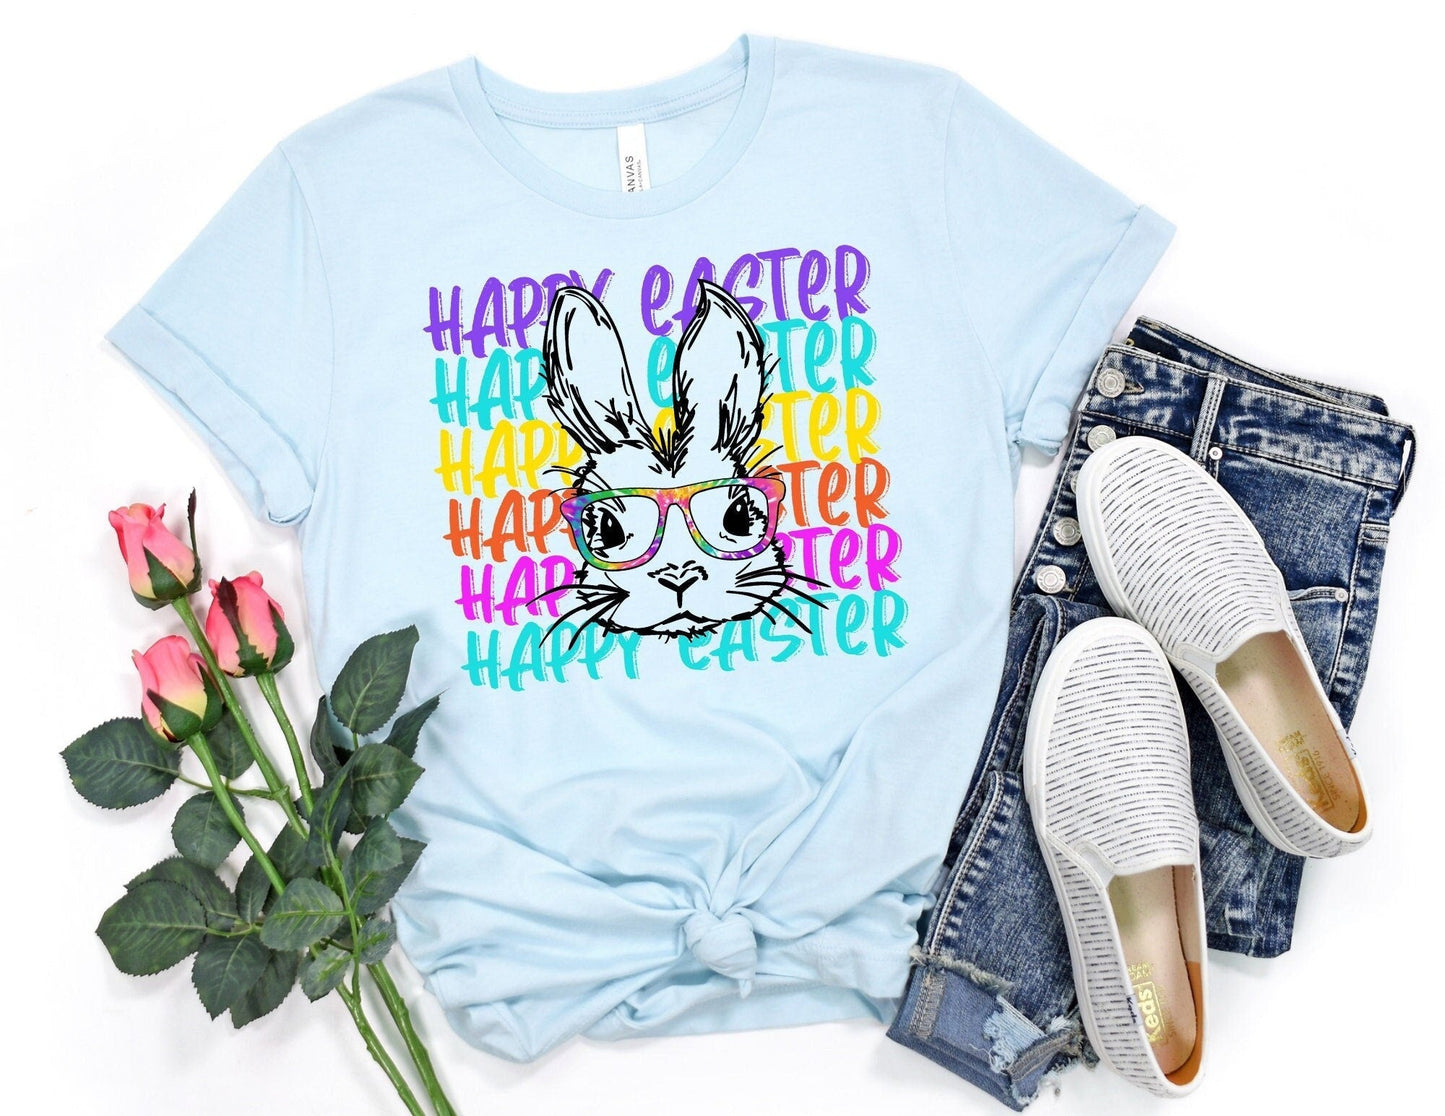 Happy Easter with Bunny Shirt - Easter Bunny Shirt